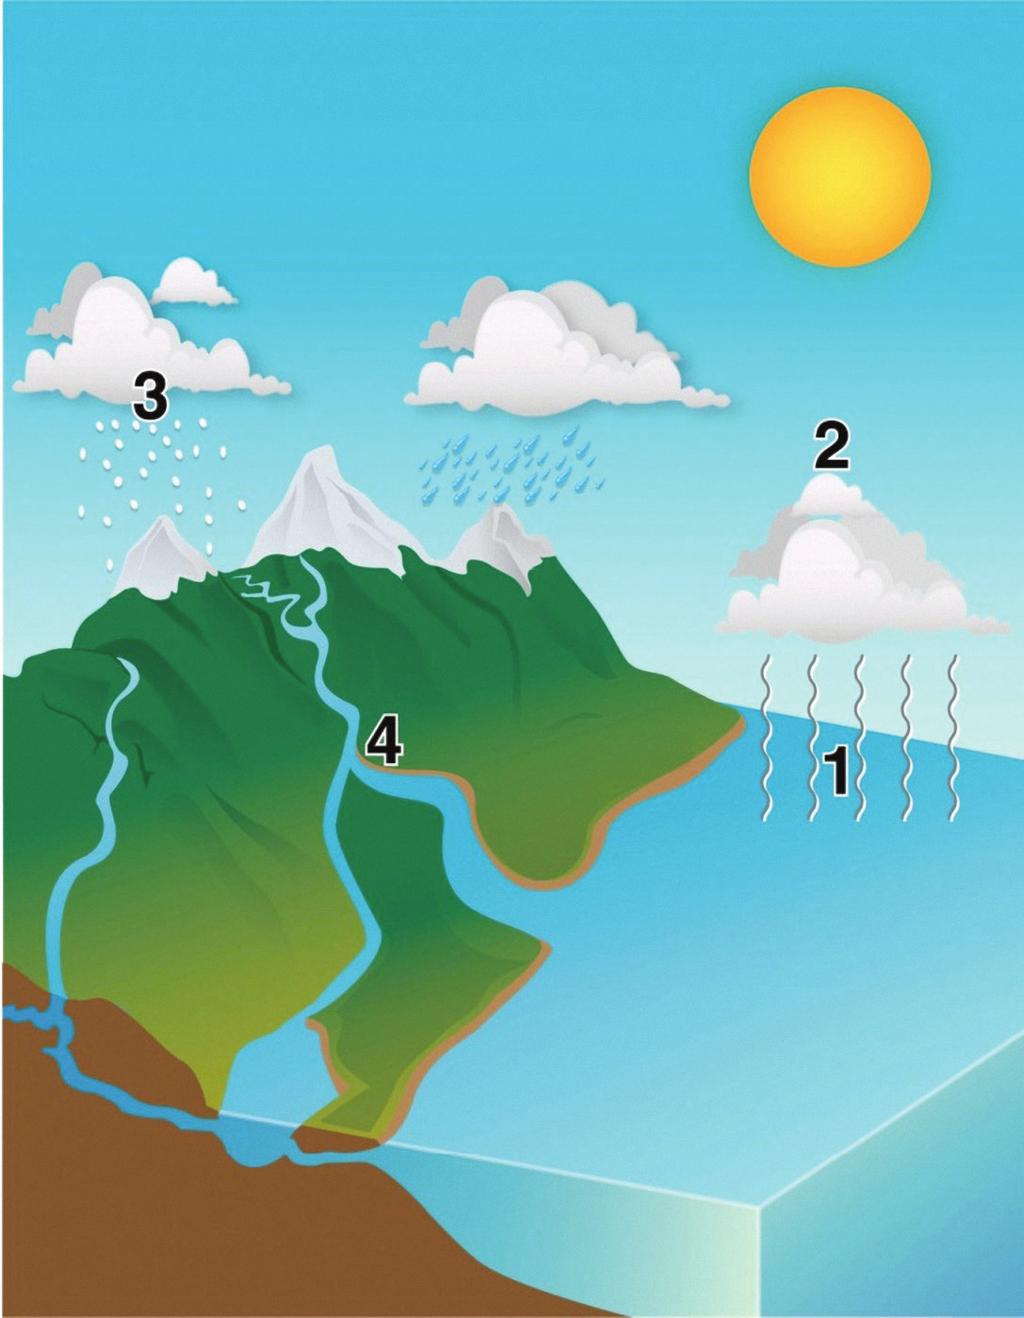 What do you know? The Sun s energy powers the water cycle. Water changes state its temperature increases and decreases as it moves through different stages of the water cycle.